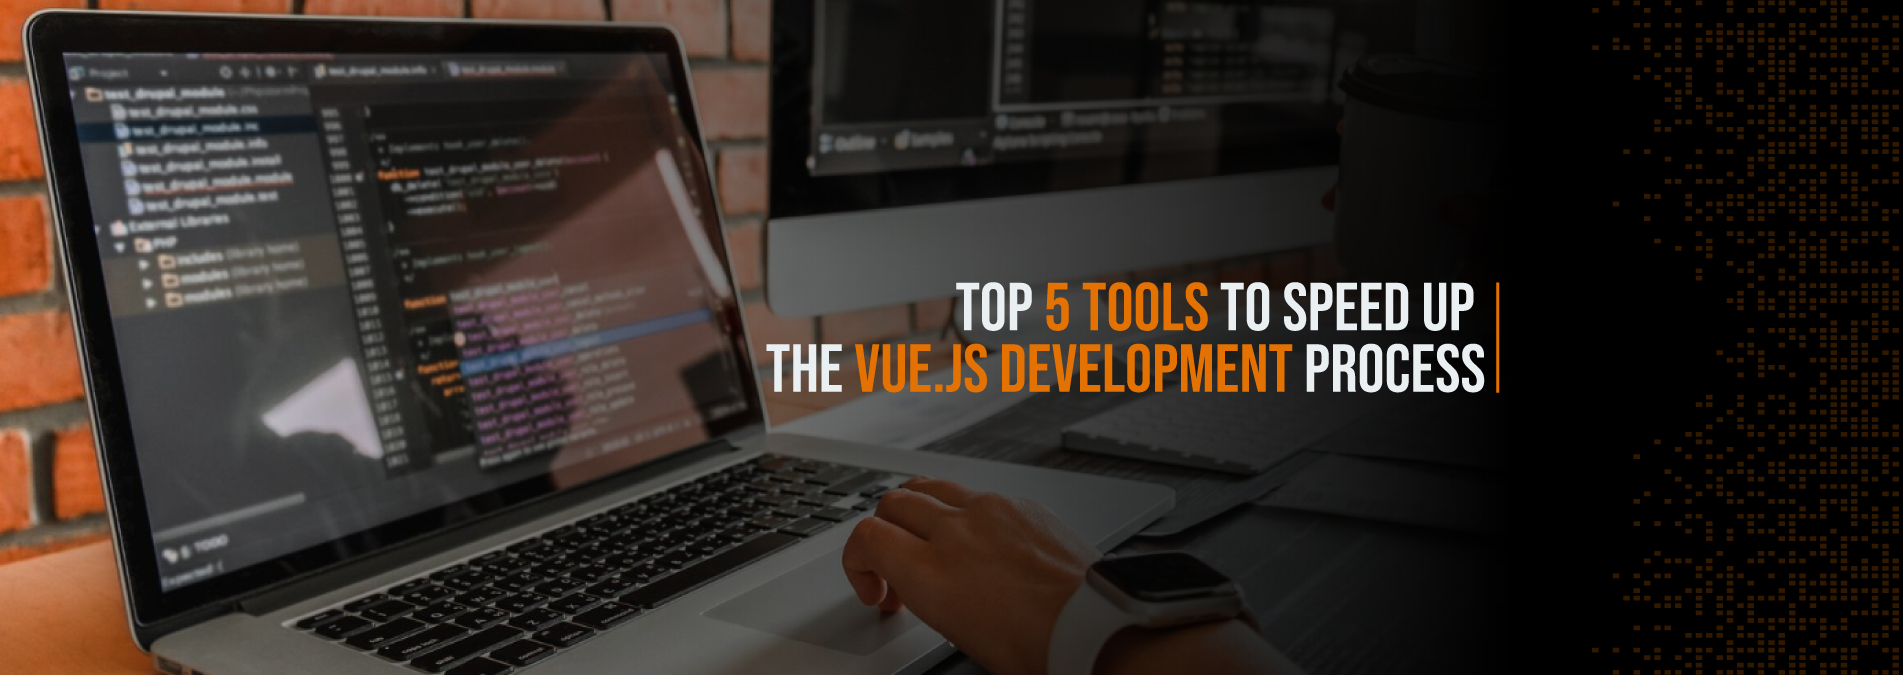 Top 5 Tools To Speed Up The Vue.js Development Process